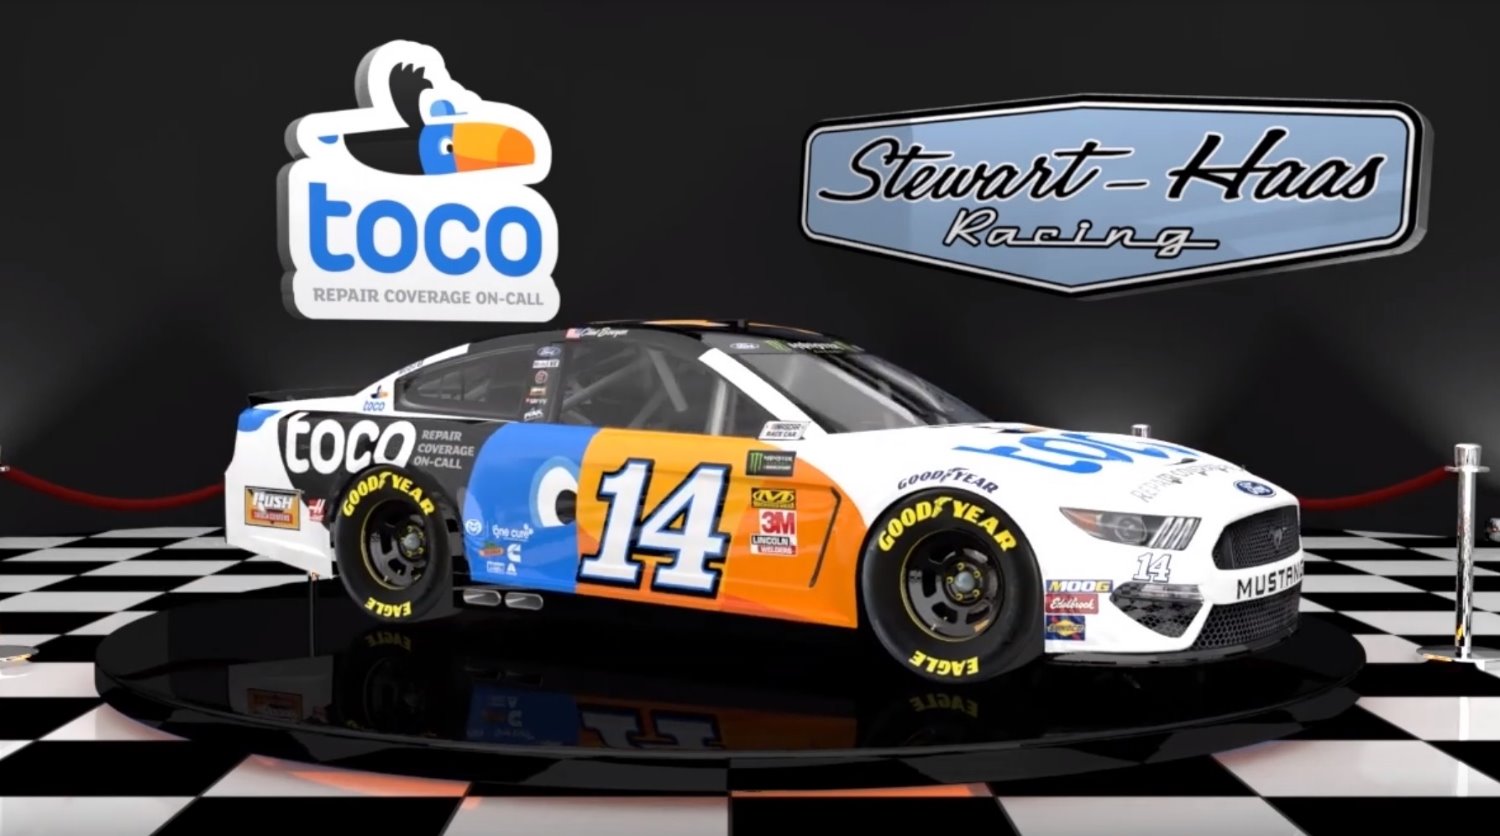 Bowyer's Toco sponsorship livery